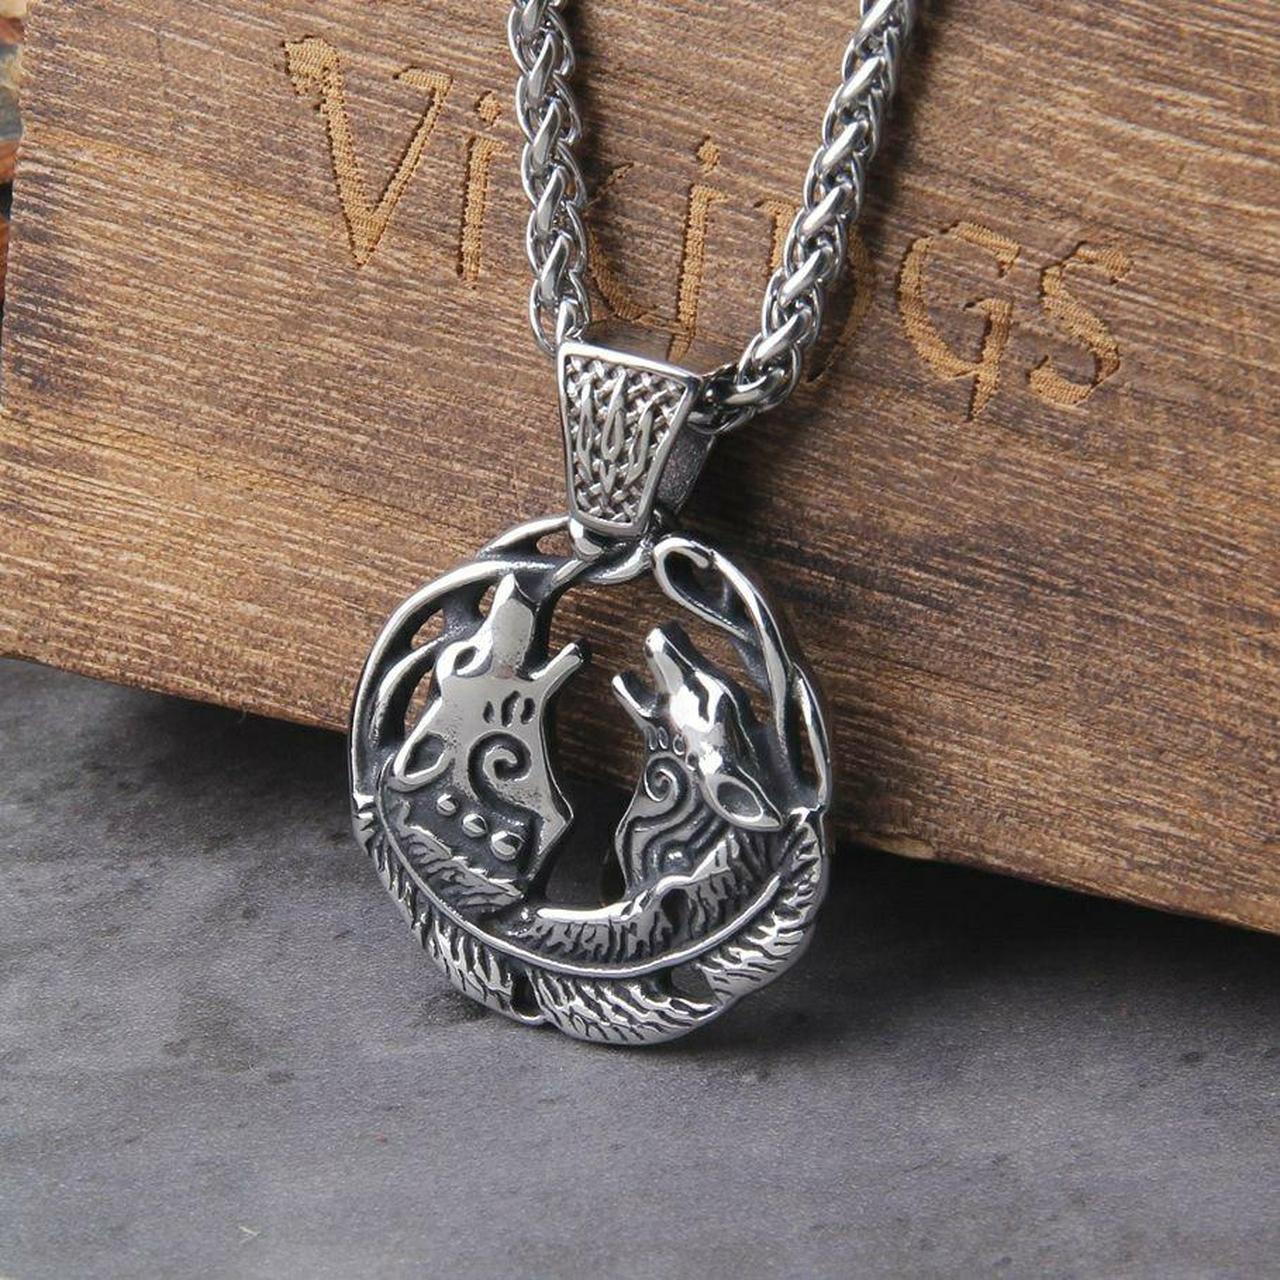 Elfasio Viking Pendant Necklace for Men Pirate Drakkar Ship Norse Sea  Monster Octopus Tentacle Stainless Steel Both Sided Chain Vintage Jewelry  30